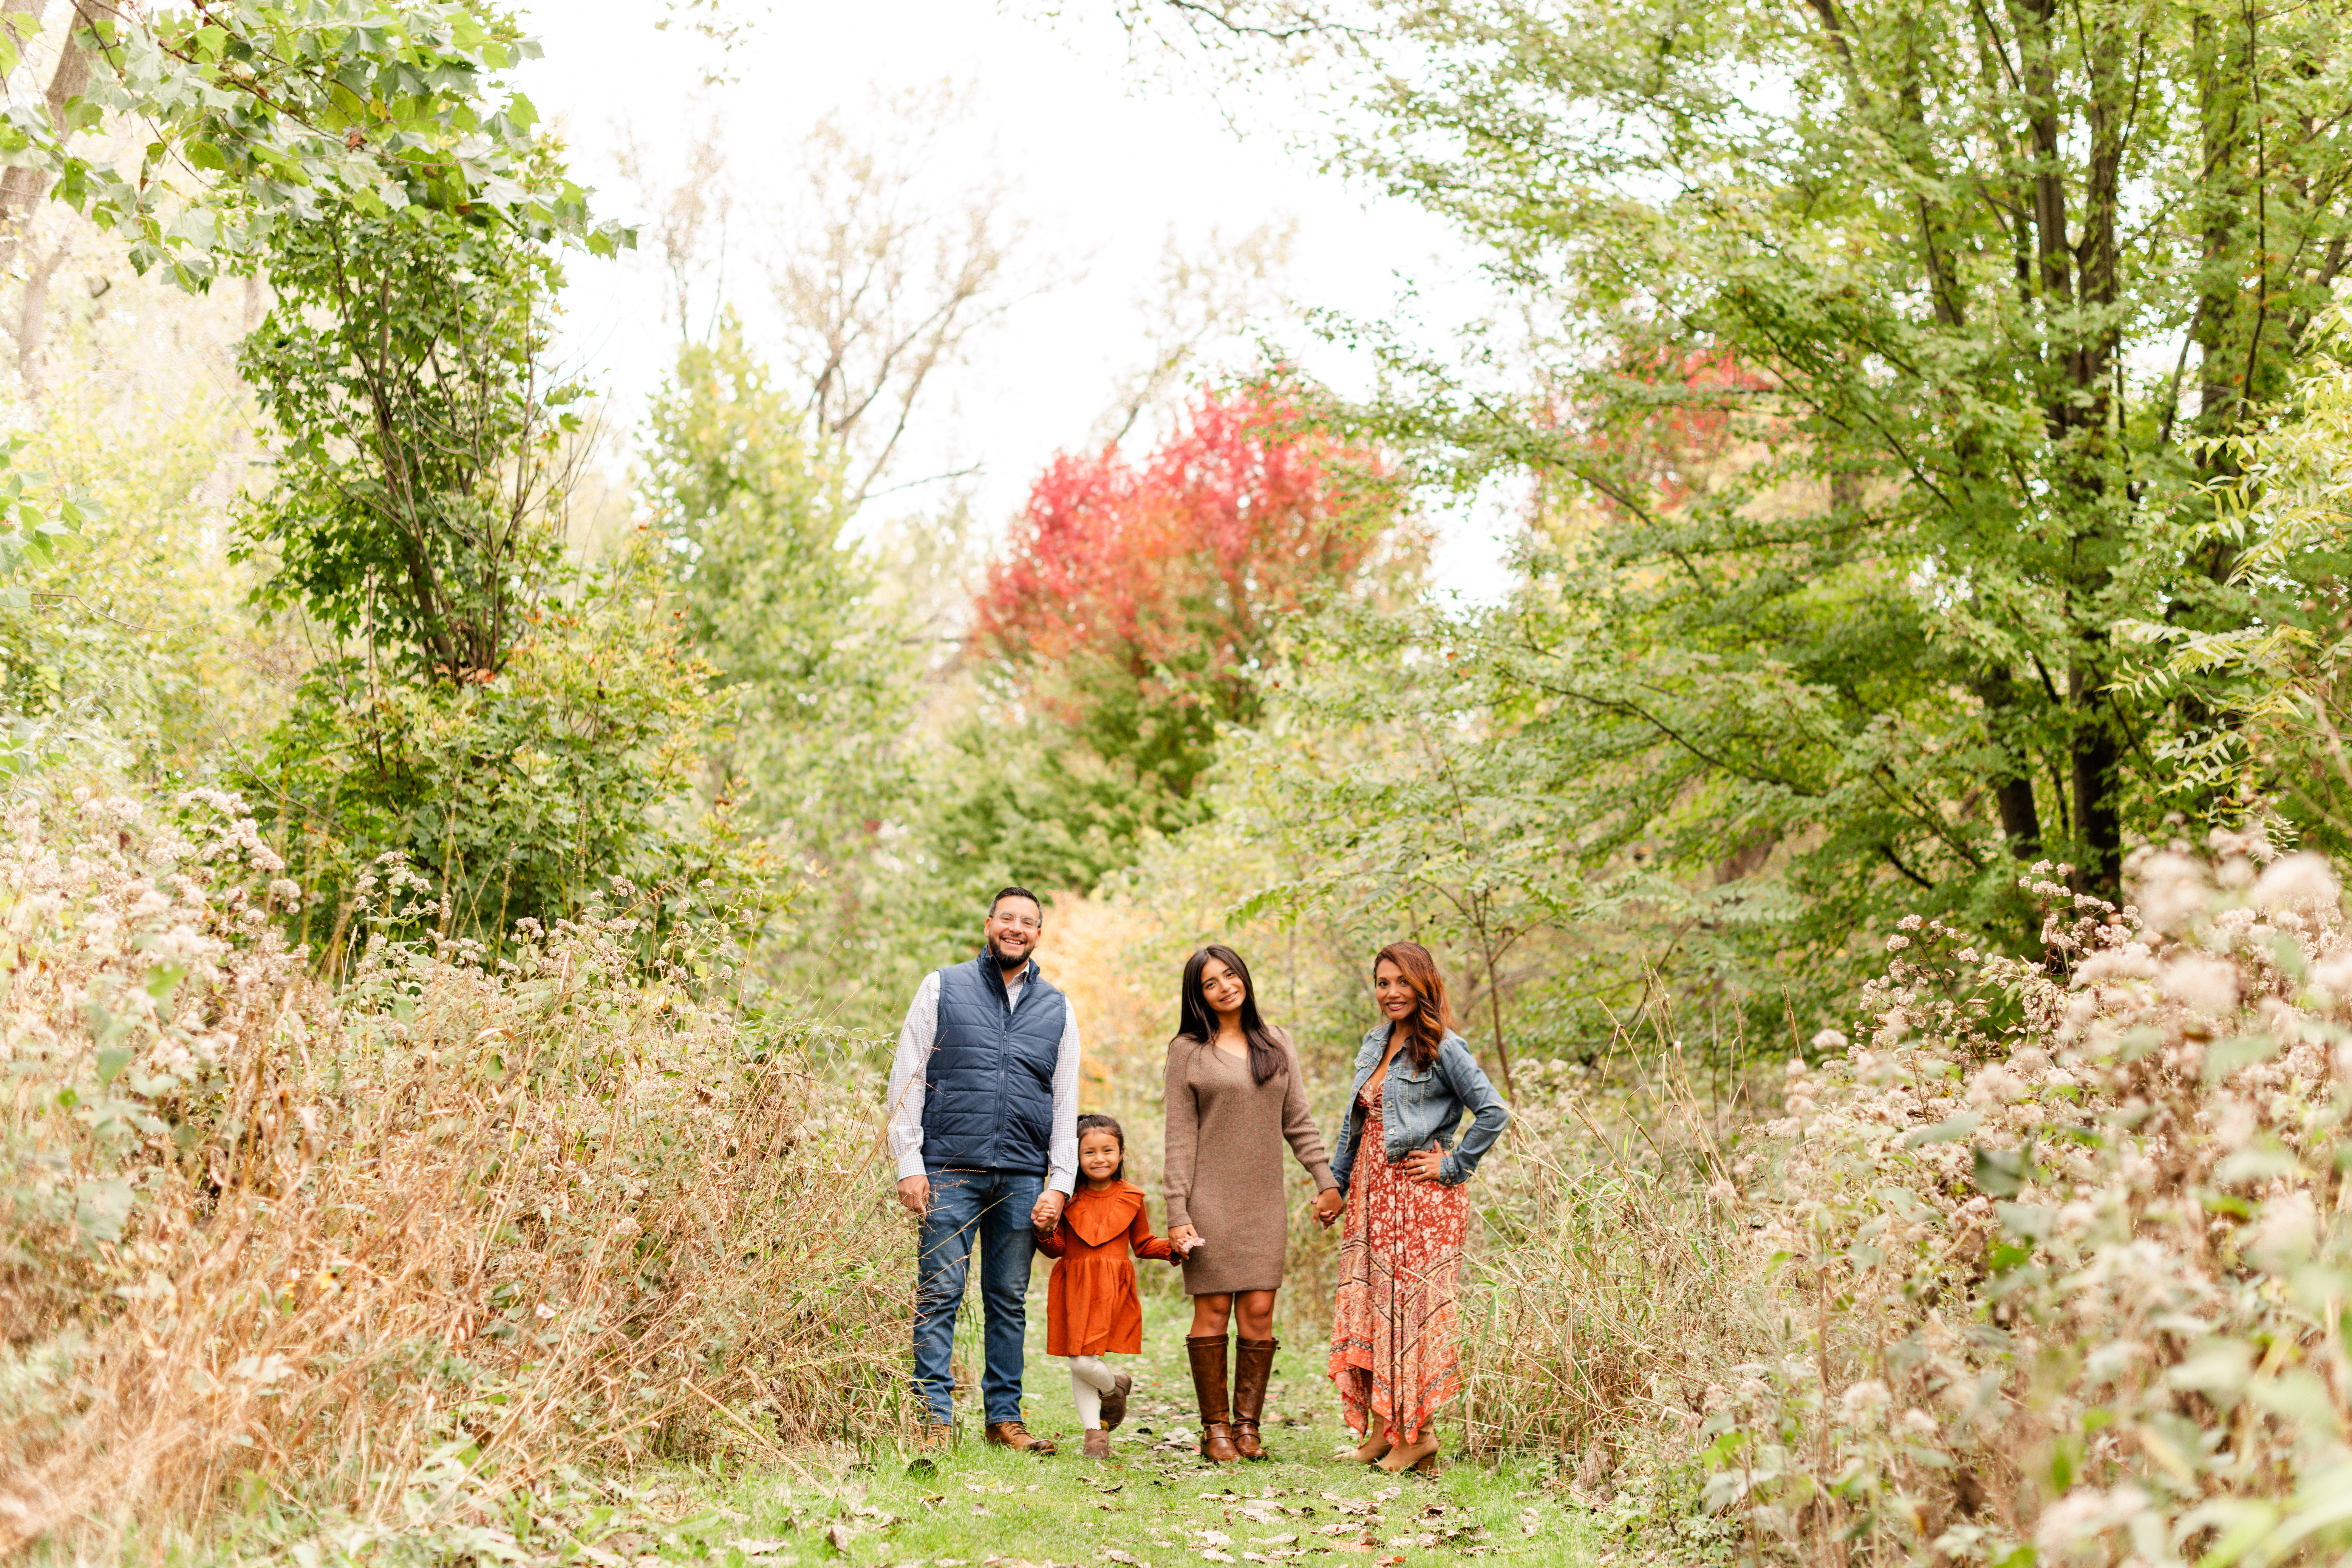 The Alvarez family holding hands surrounded by colorful fall leaves and trees in Lake Geneva, Wisconsin.